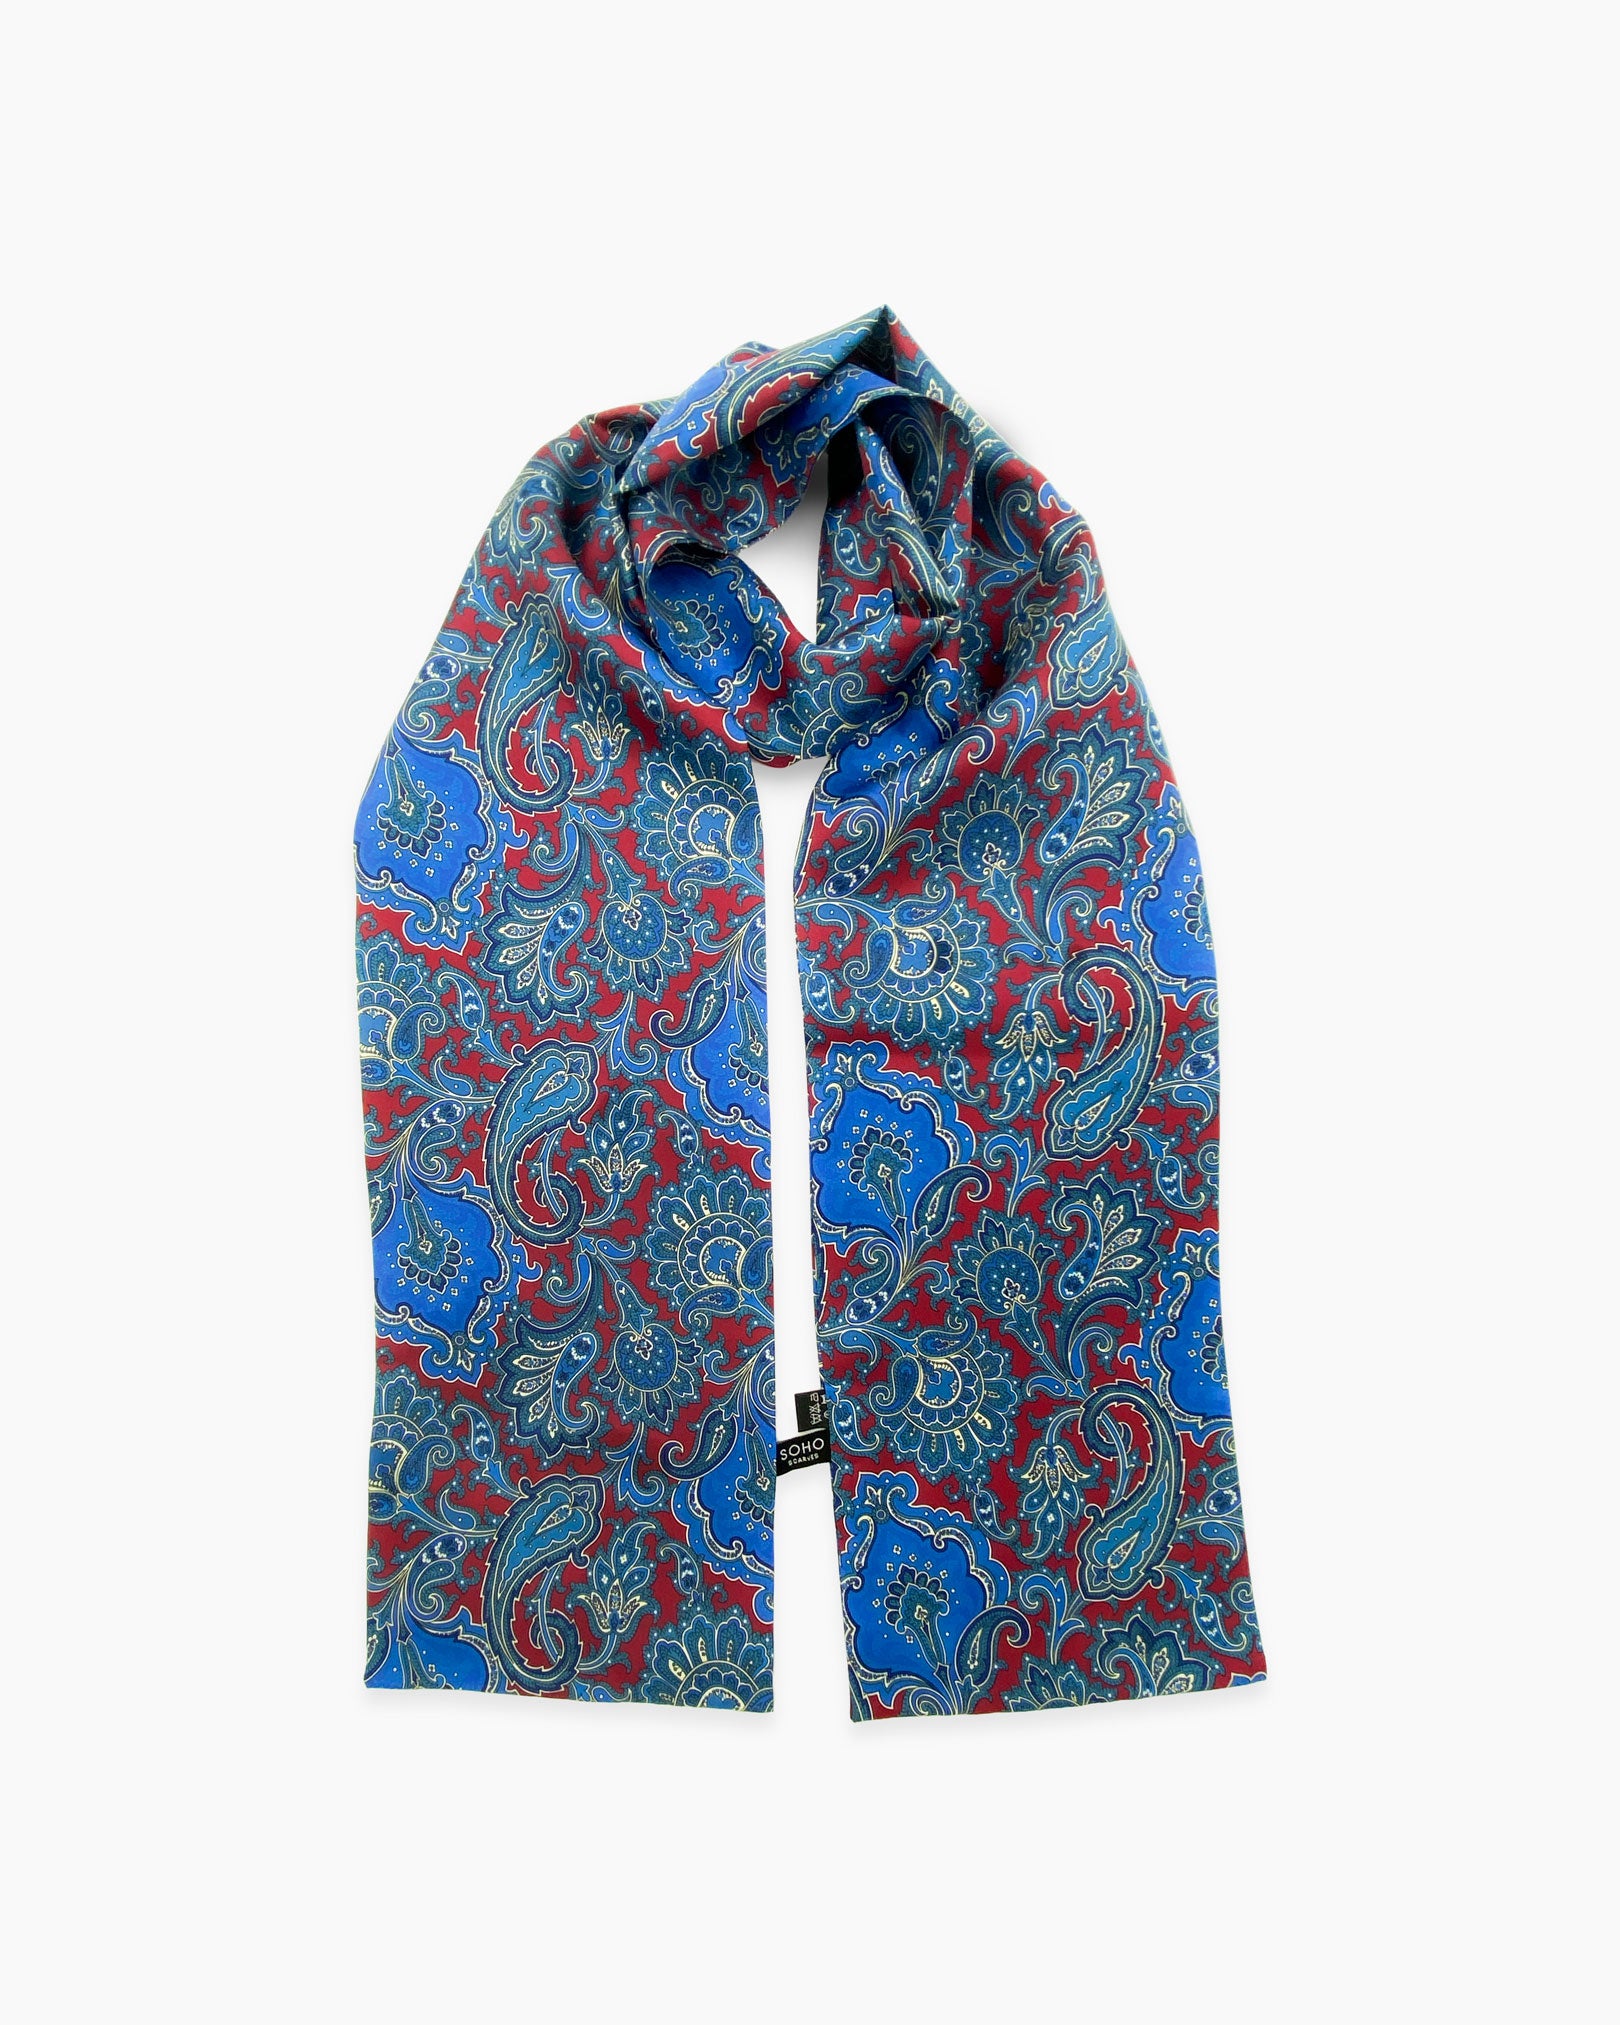 Looped view of the 'Dean' silk scarf, clearly showing the burgundy and blue patterns and a matching 3-inch fringe.